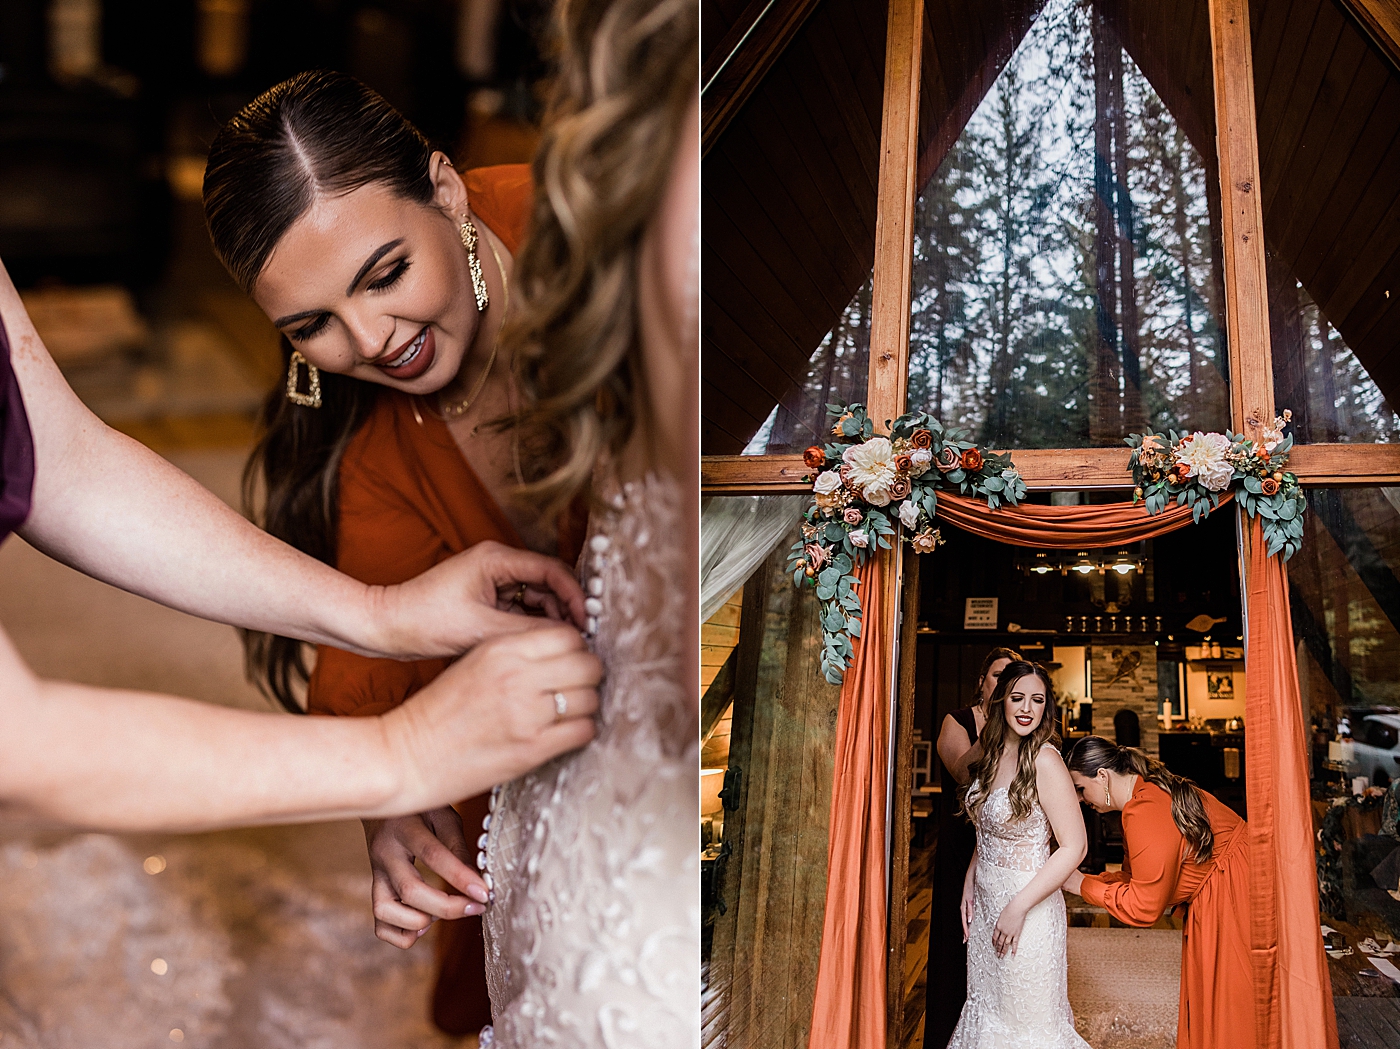 Bride getting ready for elopement | Megan Montalvo Photography